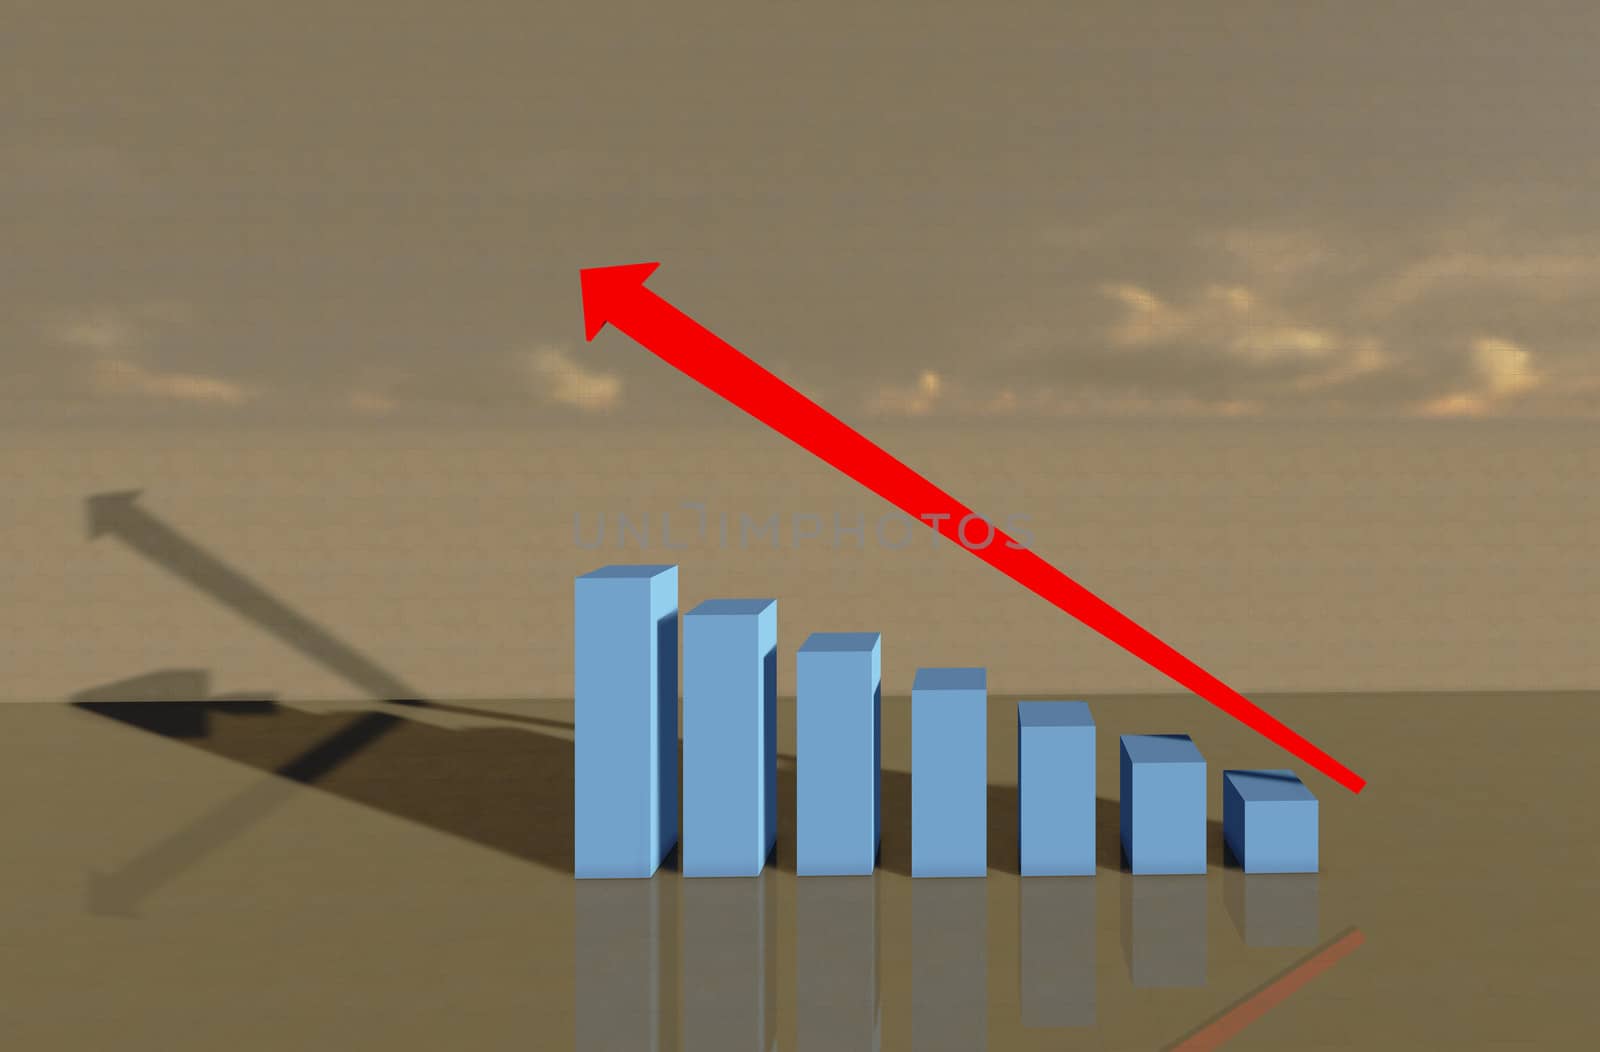 Growth Chart made in 3d software